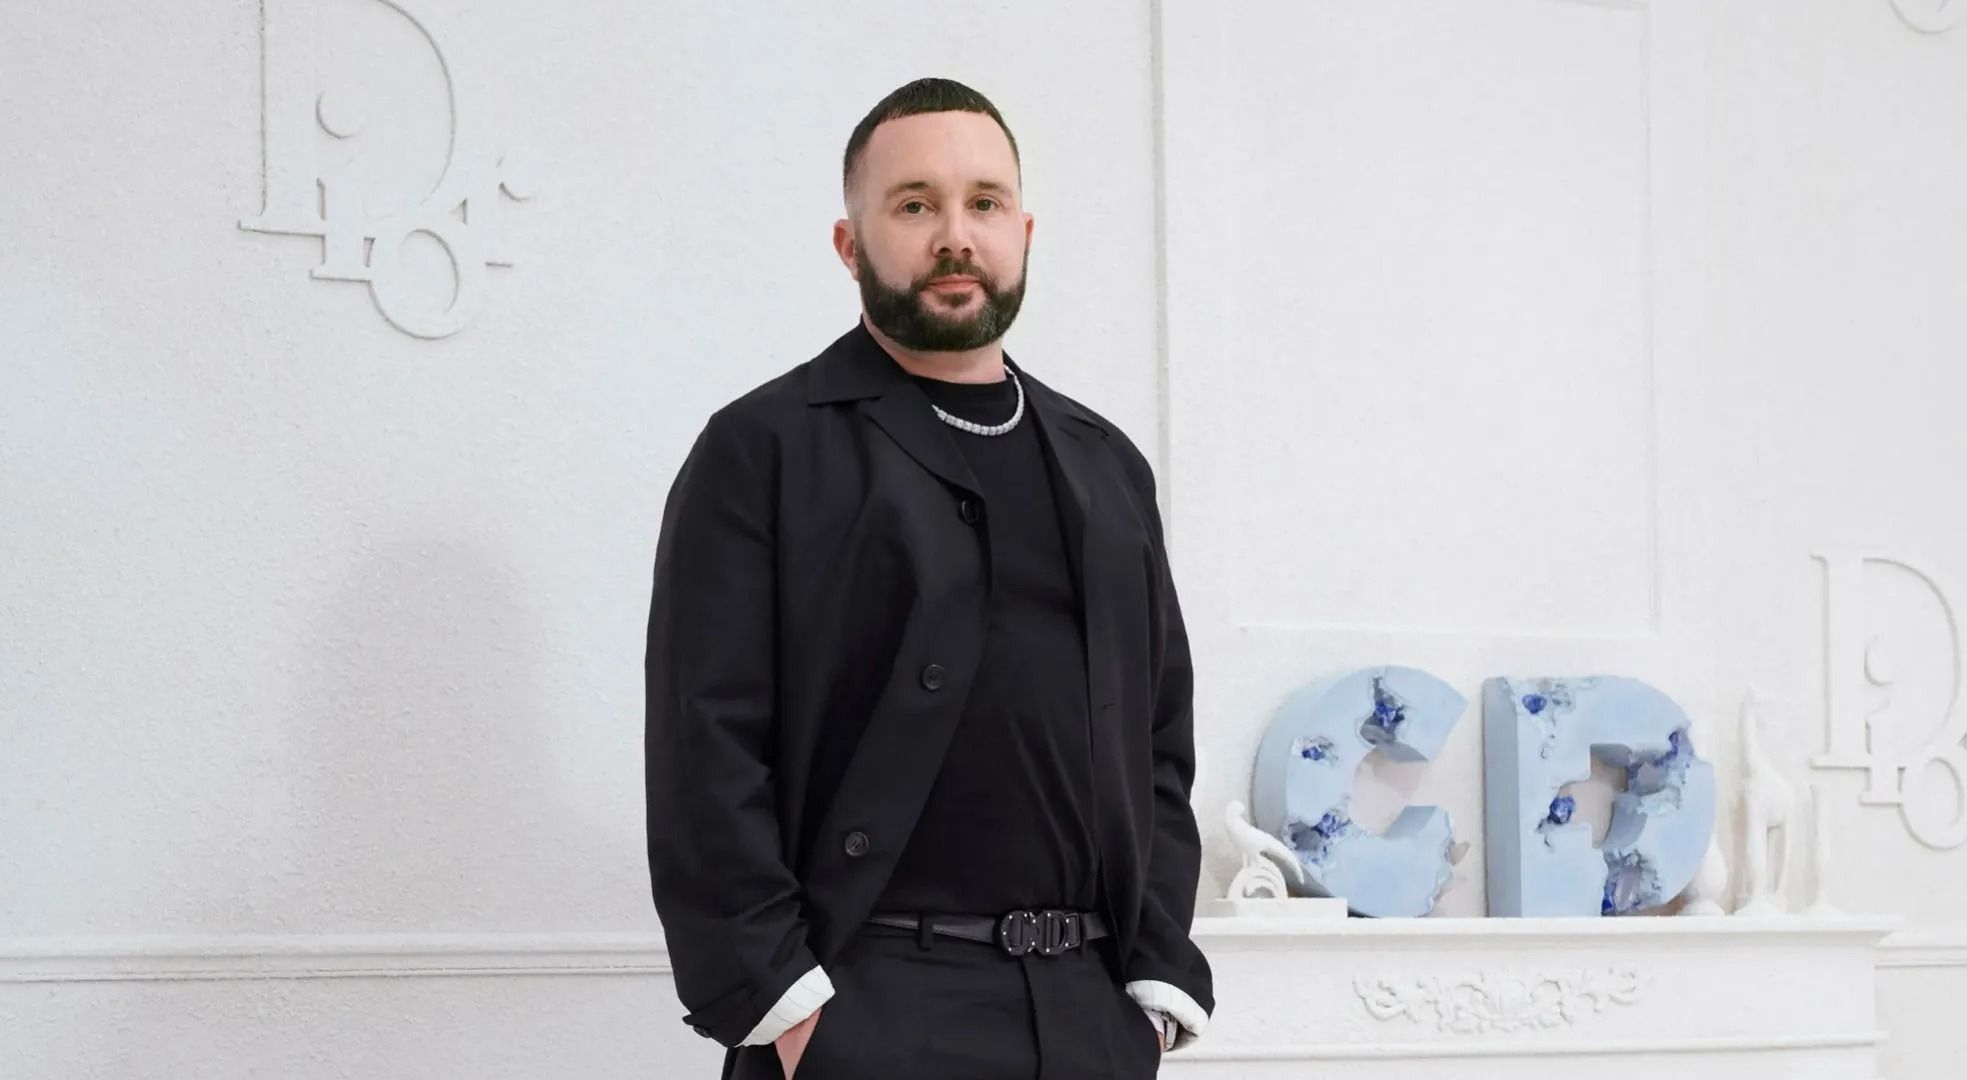 Kim Jones is a Force of Fashion at Dior Men